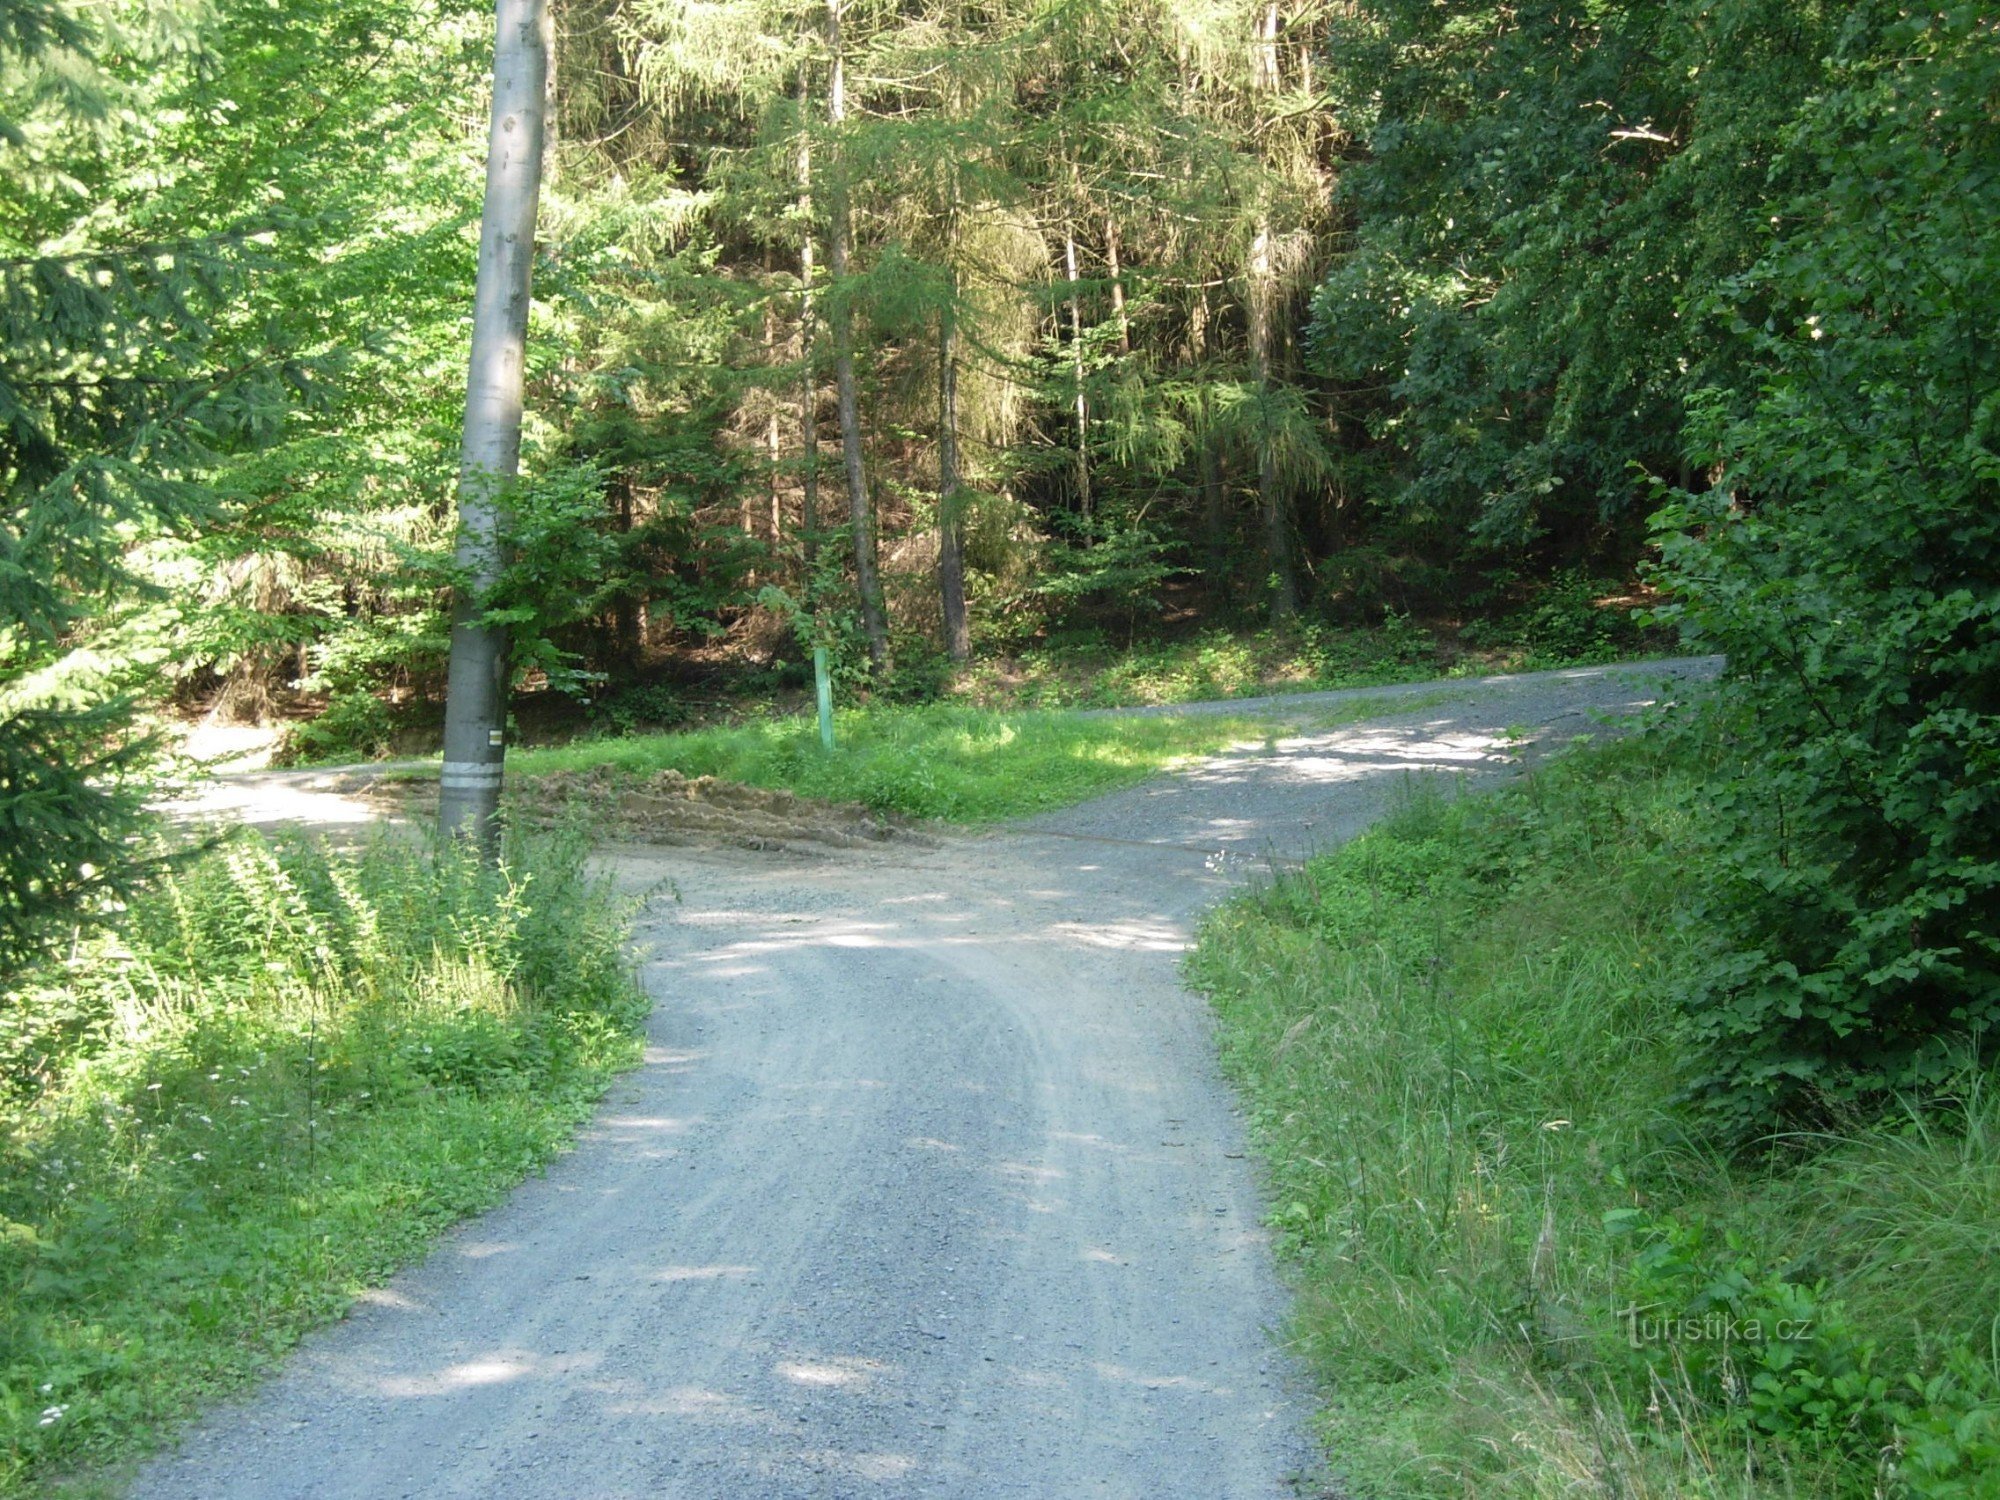 forest fork (point 4 of the route)